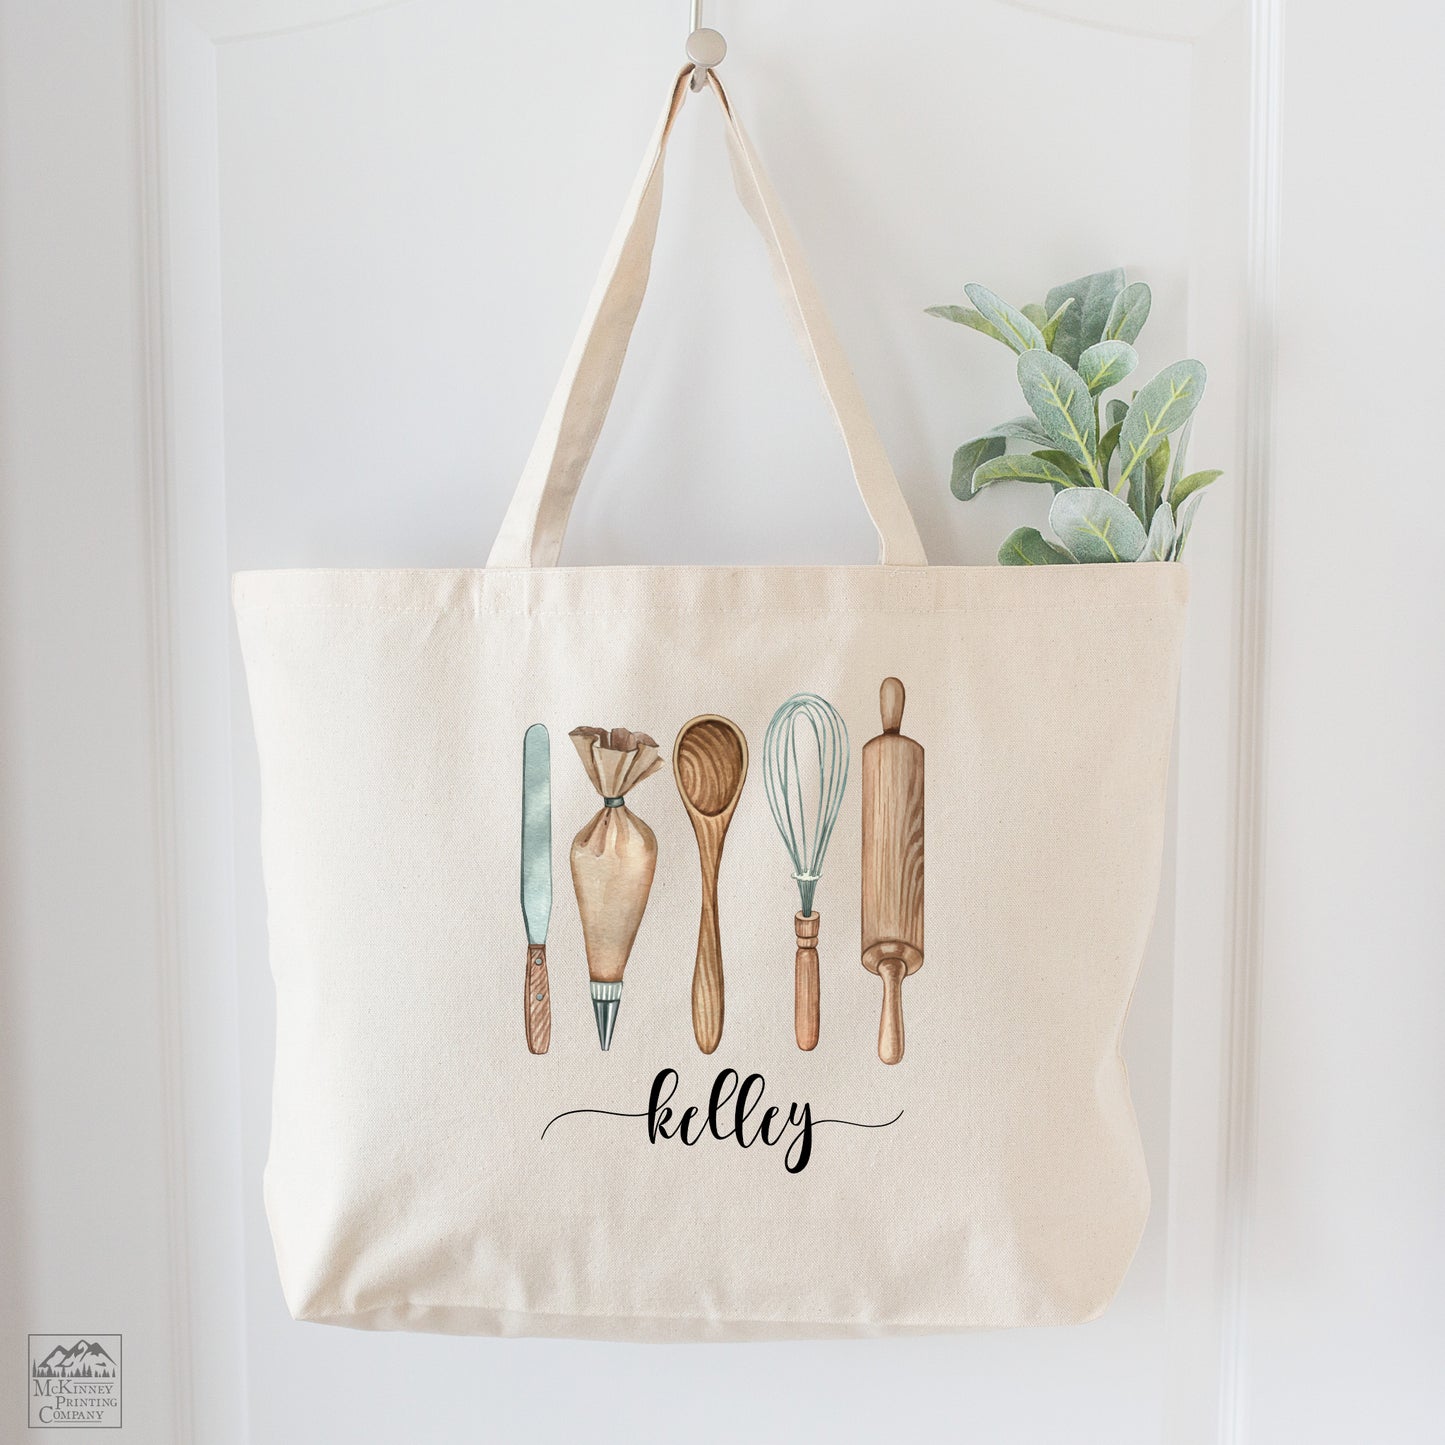 Pastry Chef Gifts - Personalized Canvas Tote Bag with Zipper, Cooking, Baker, Culinary